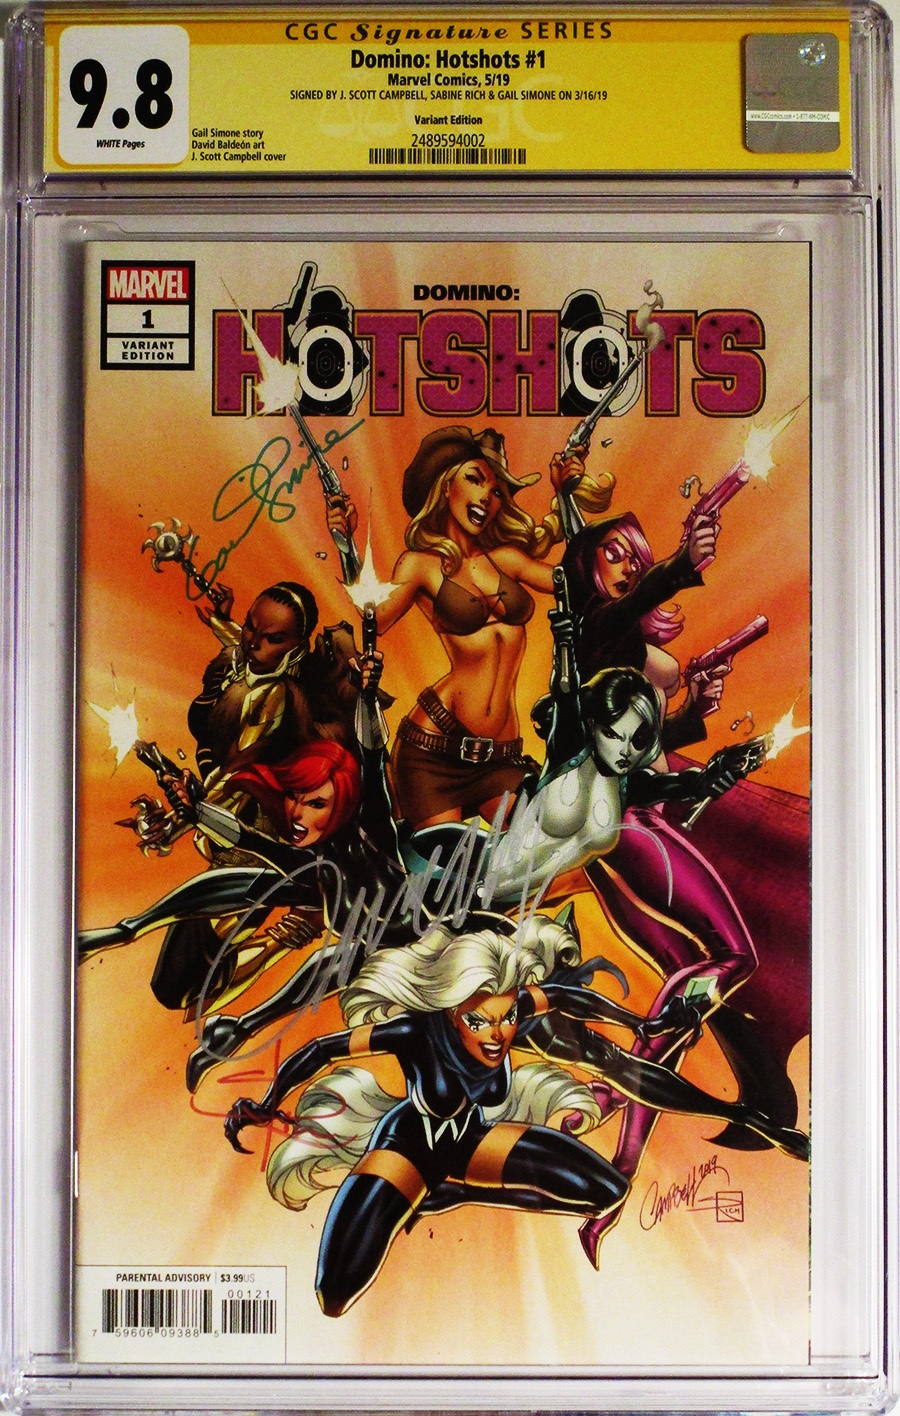 Domino Hotshots #1 Cover F Incentive J Scott Campbell Variant Cover CGC Signature Series 9.8 Signed by J Scott Campbell Sabine Rich & Gail Simone